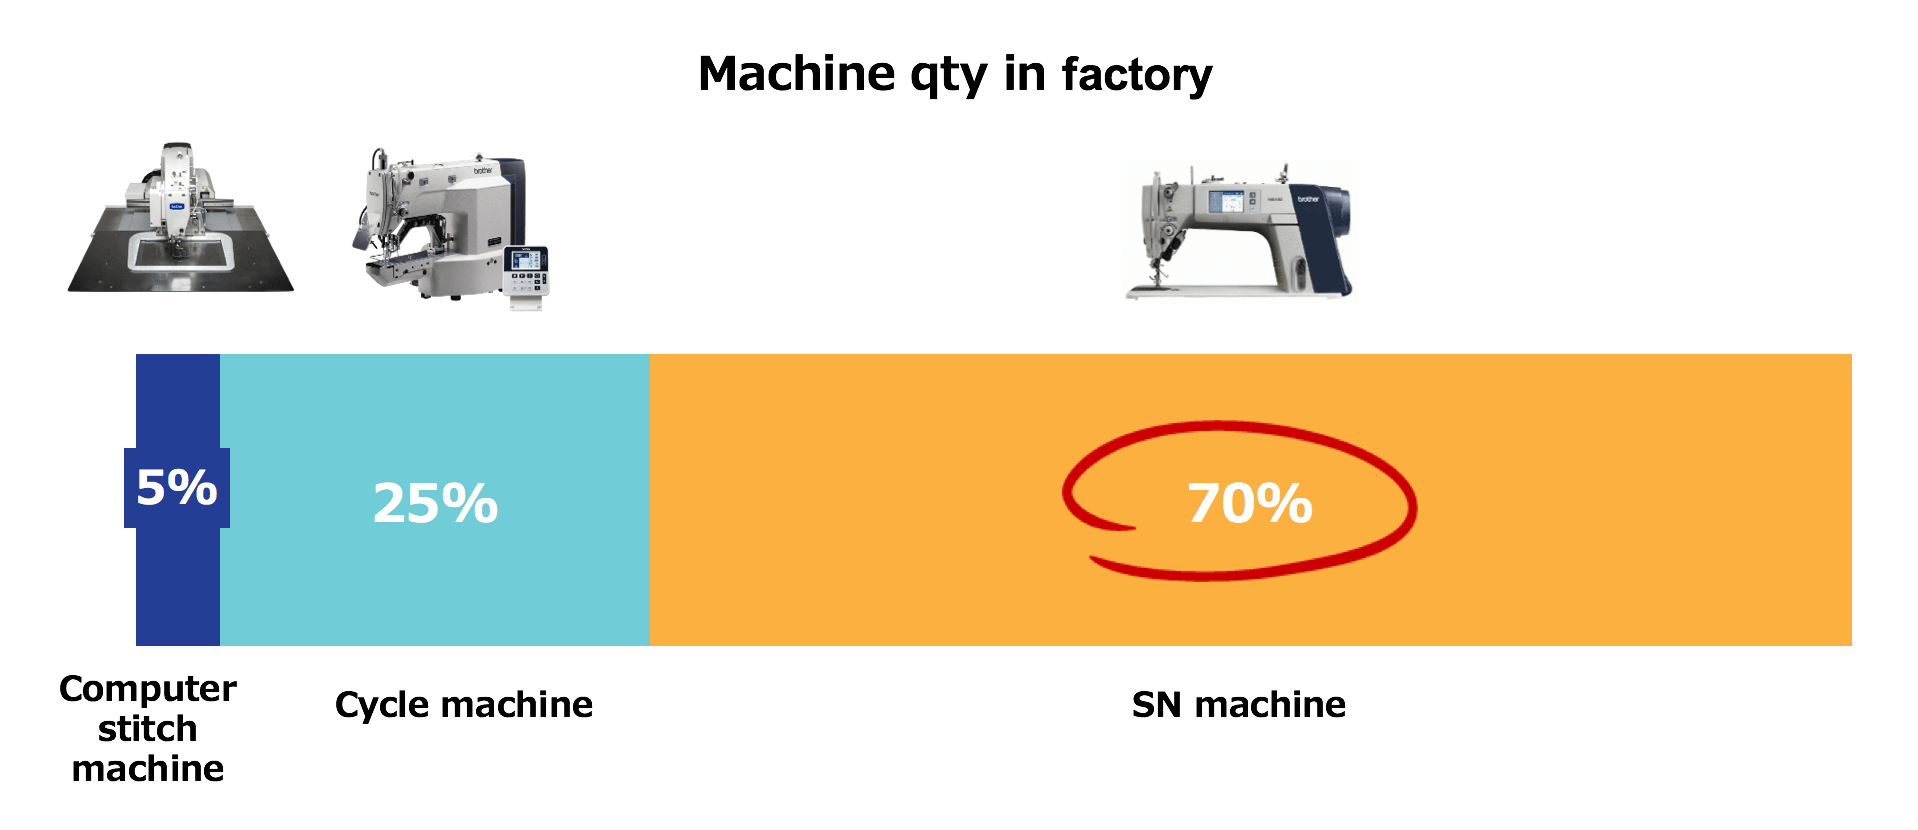 The most common machine in the garment factory is the SN machine. It is also the cheapest machine and requires the least investment per machine.